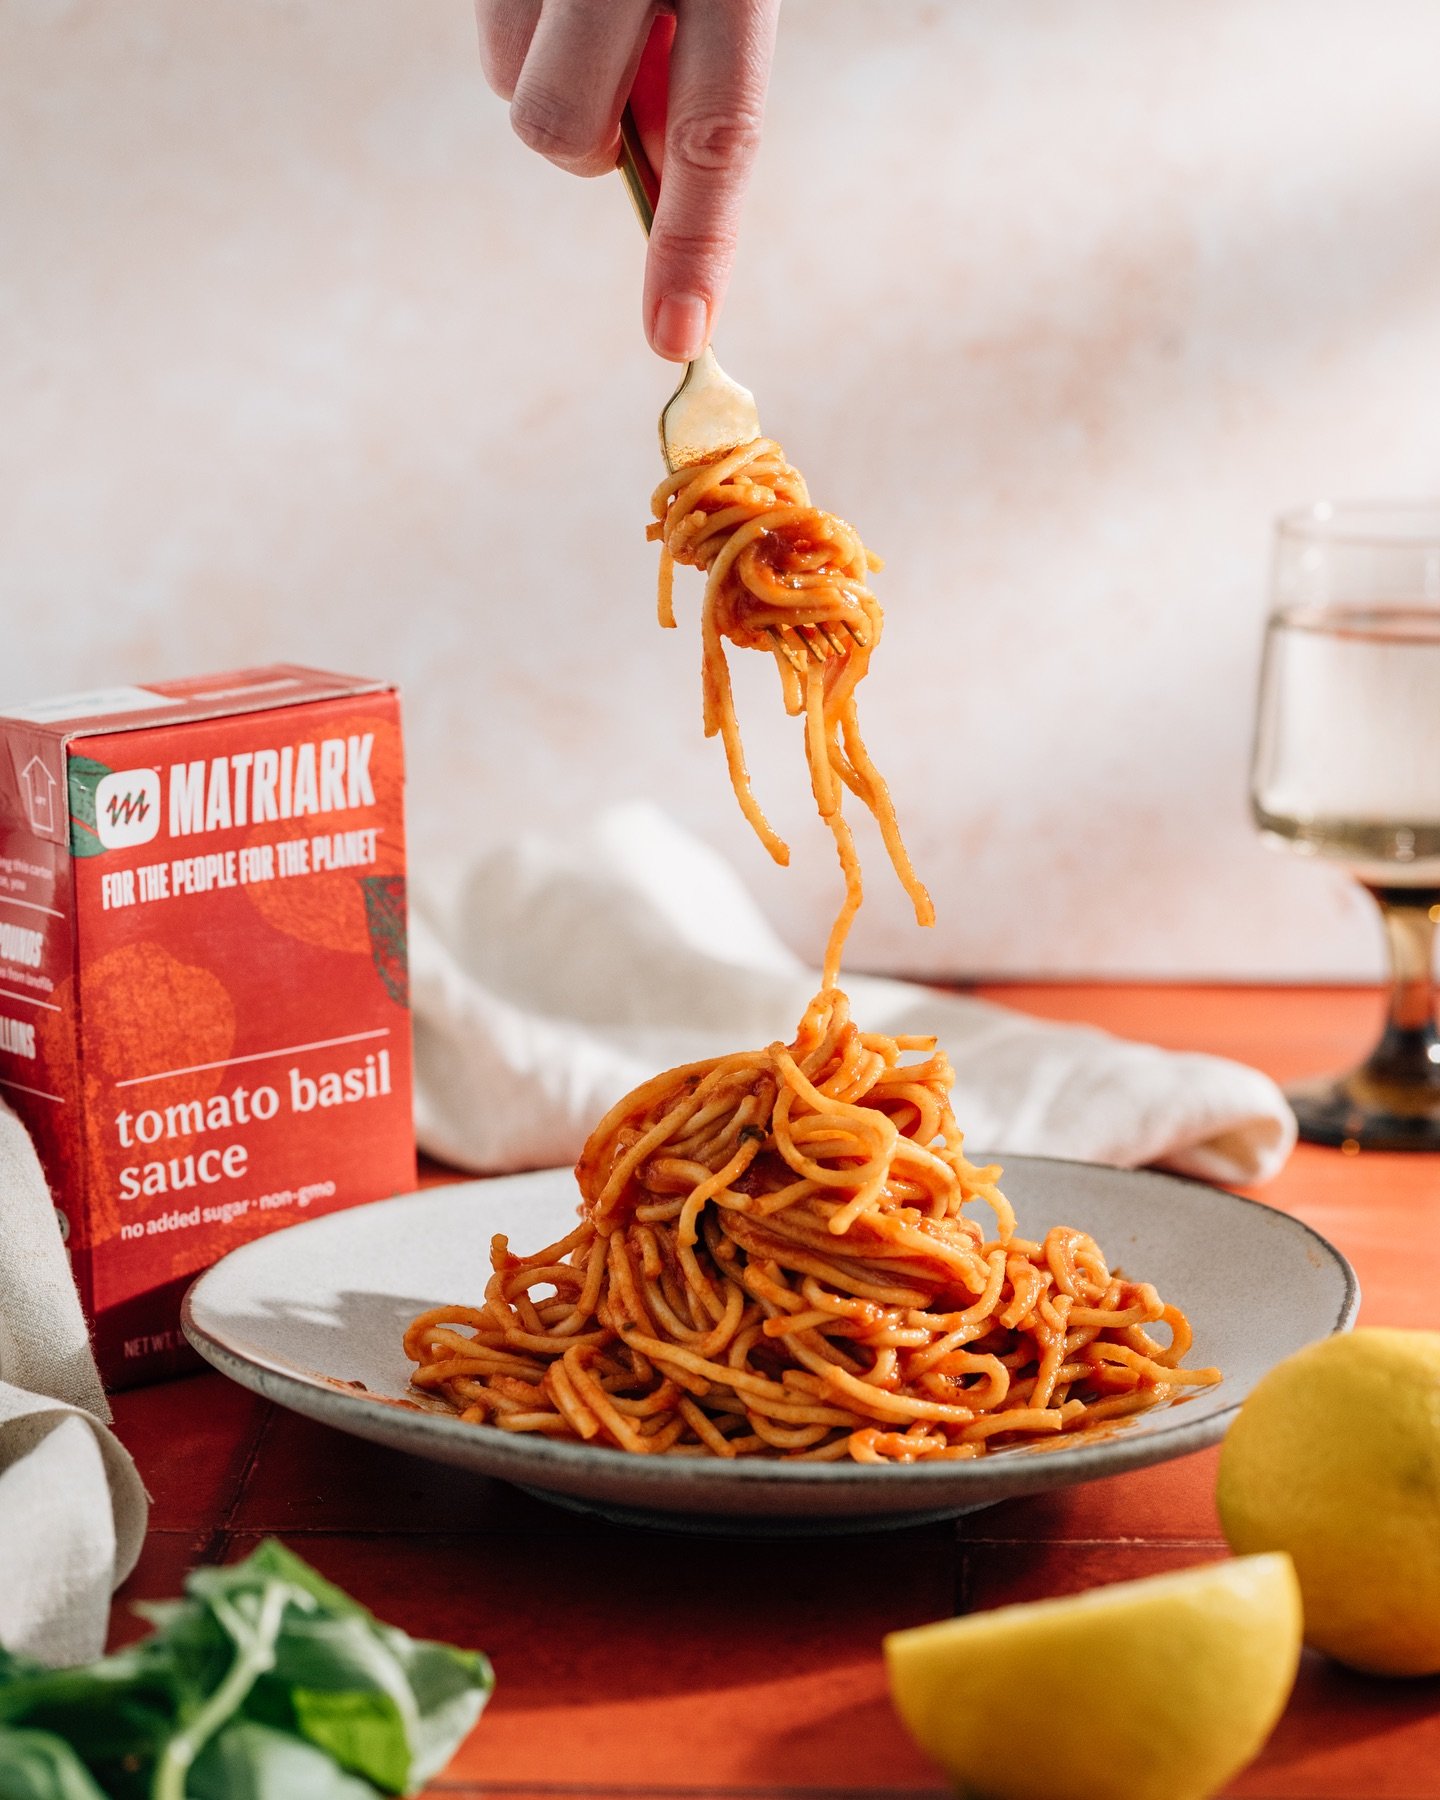 Bring a delicious dish AND a conversation starter to your next dinner party, family meal or potluck with us🍝

Our pasta sauce tastes even better than homemade, while also providing an easy way to lower your carbon footprint. We&rsquo;re reducing foo